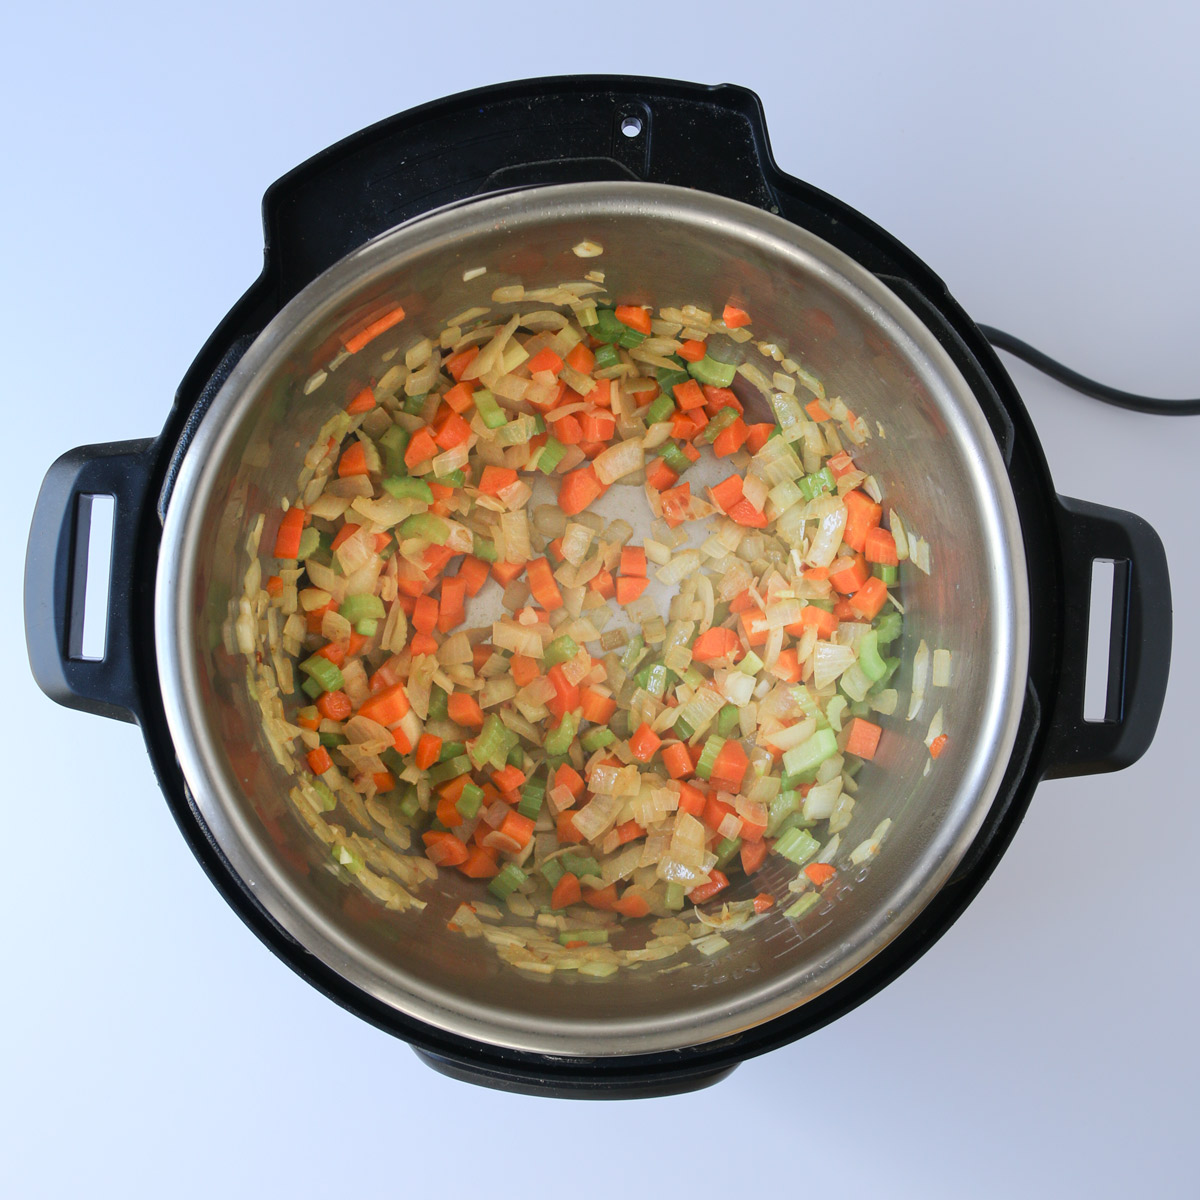 sauteed veg in instant pot.